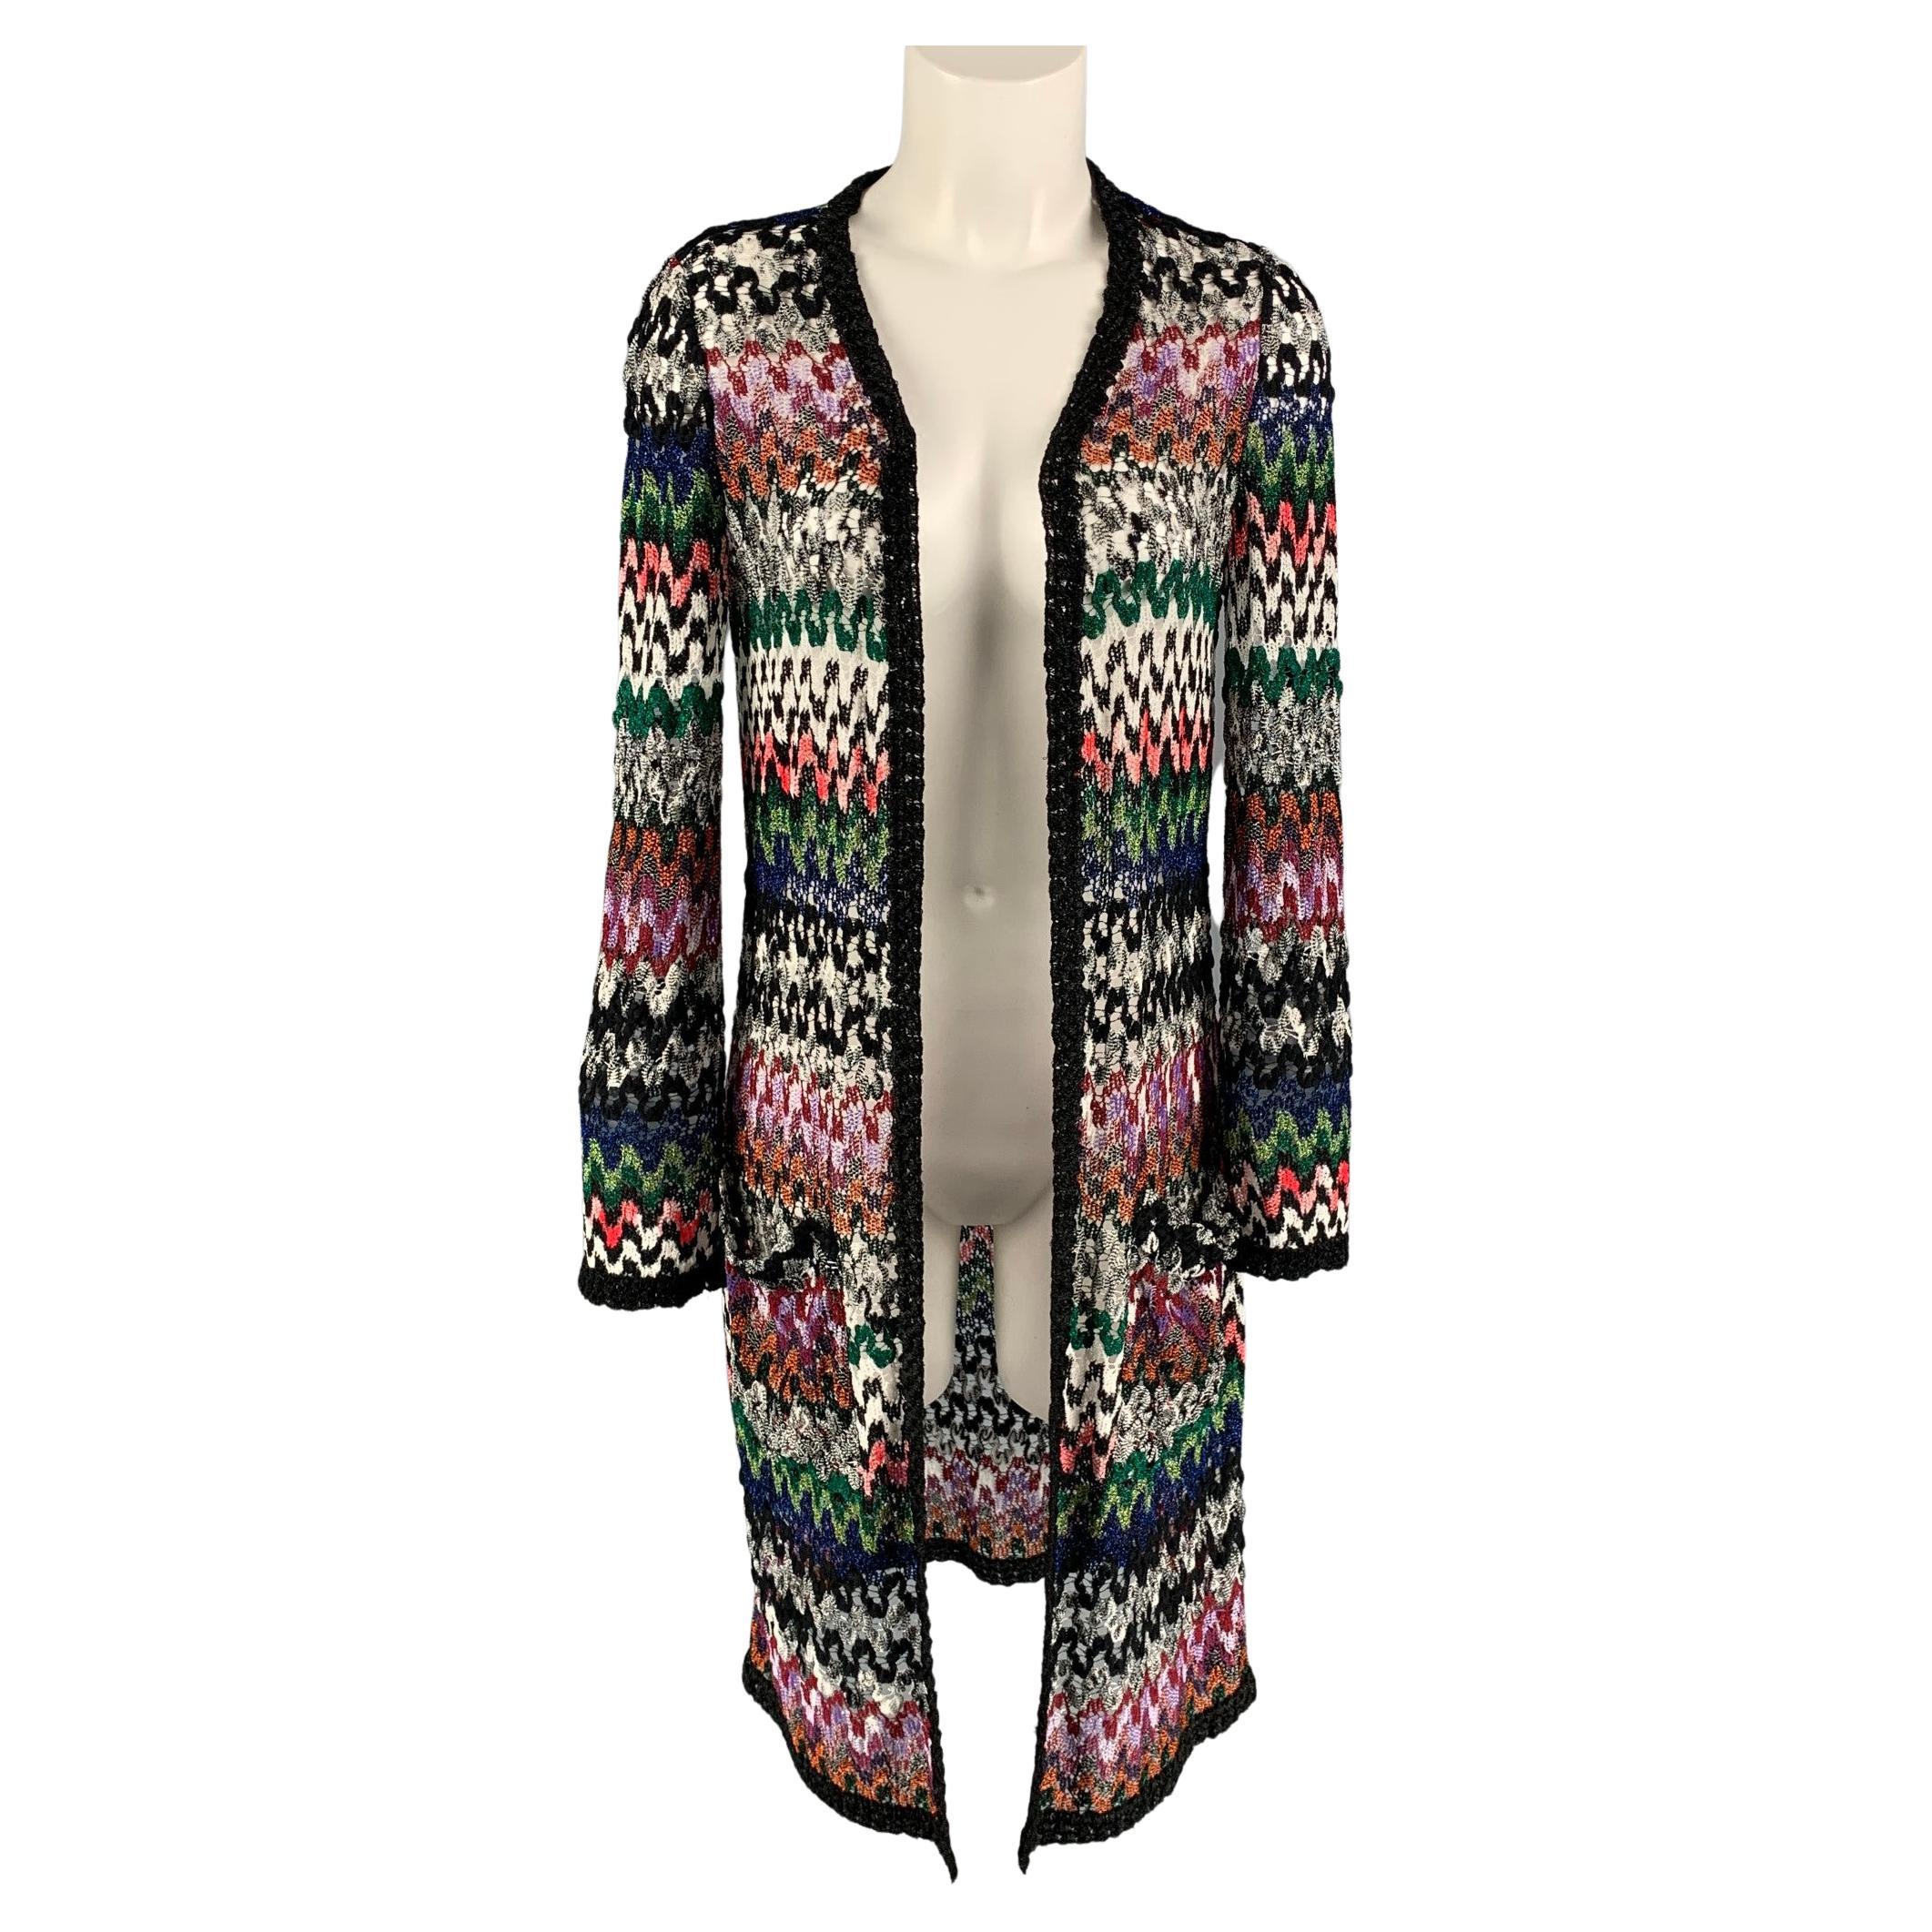 MISSONI Size 2 Multi-Color Knitted Viscose Blend Cardigan